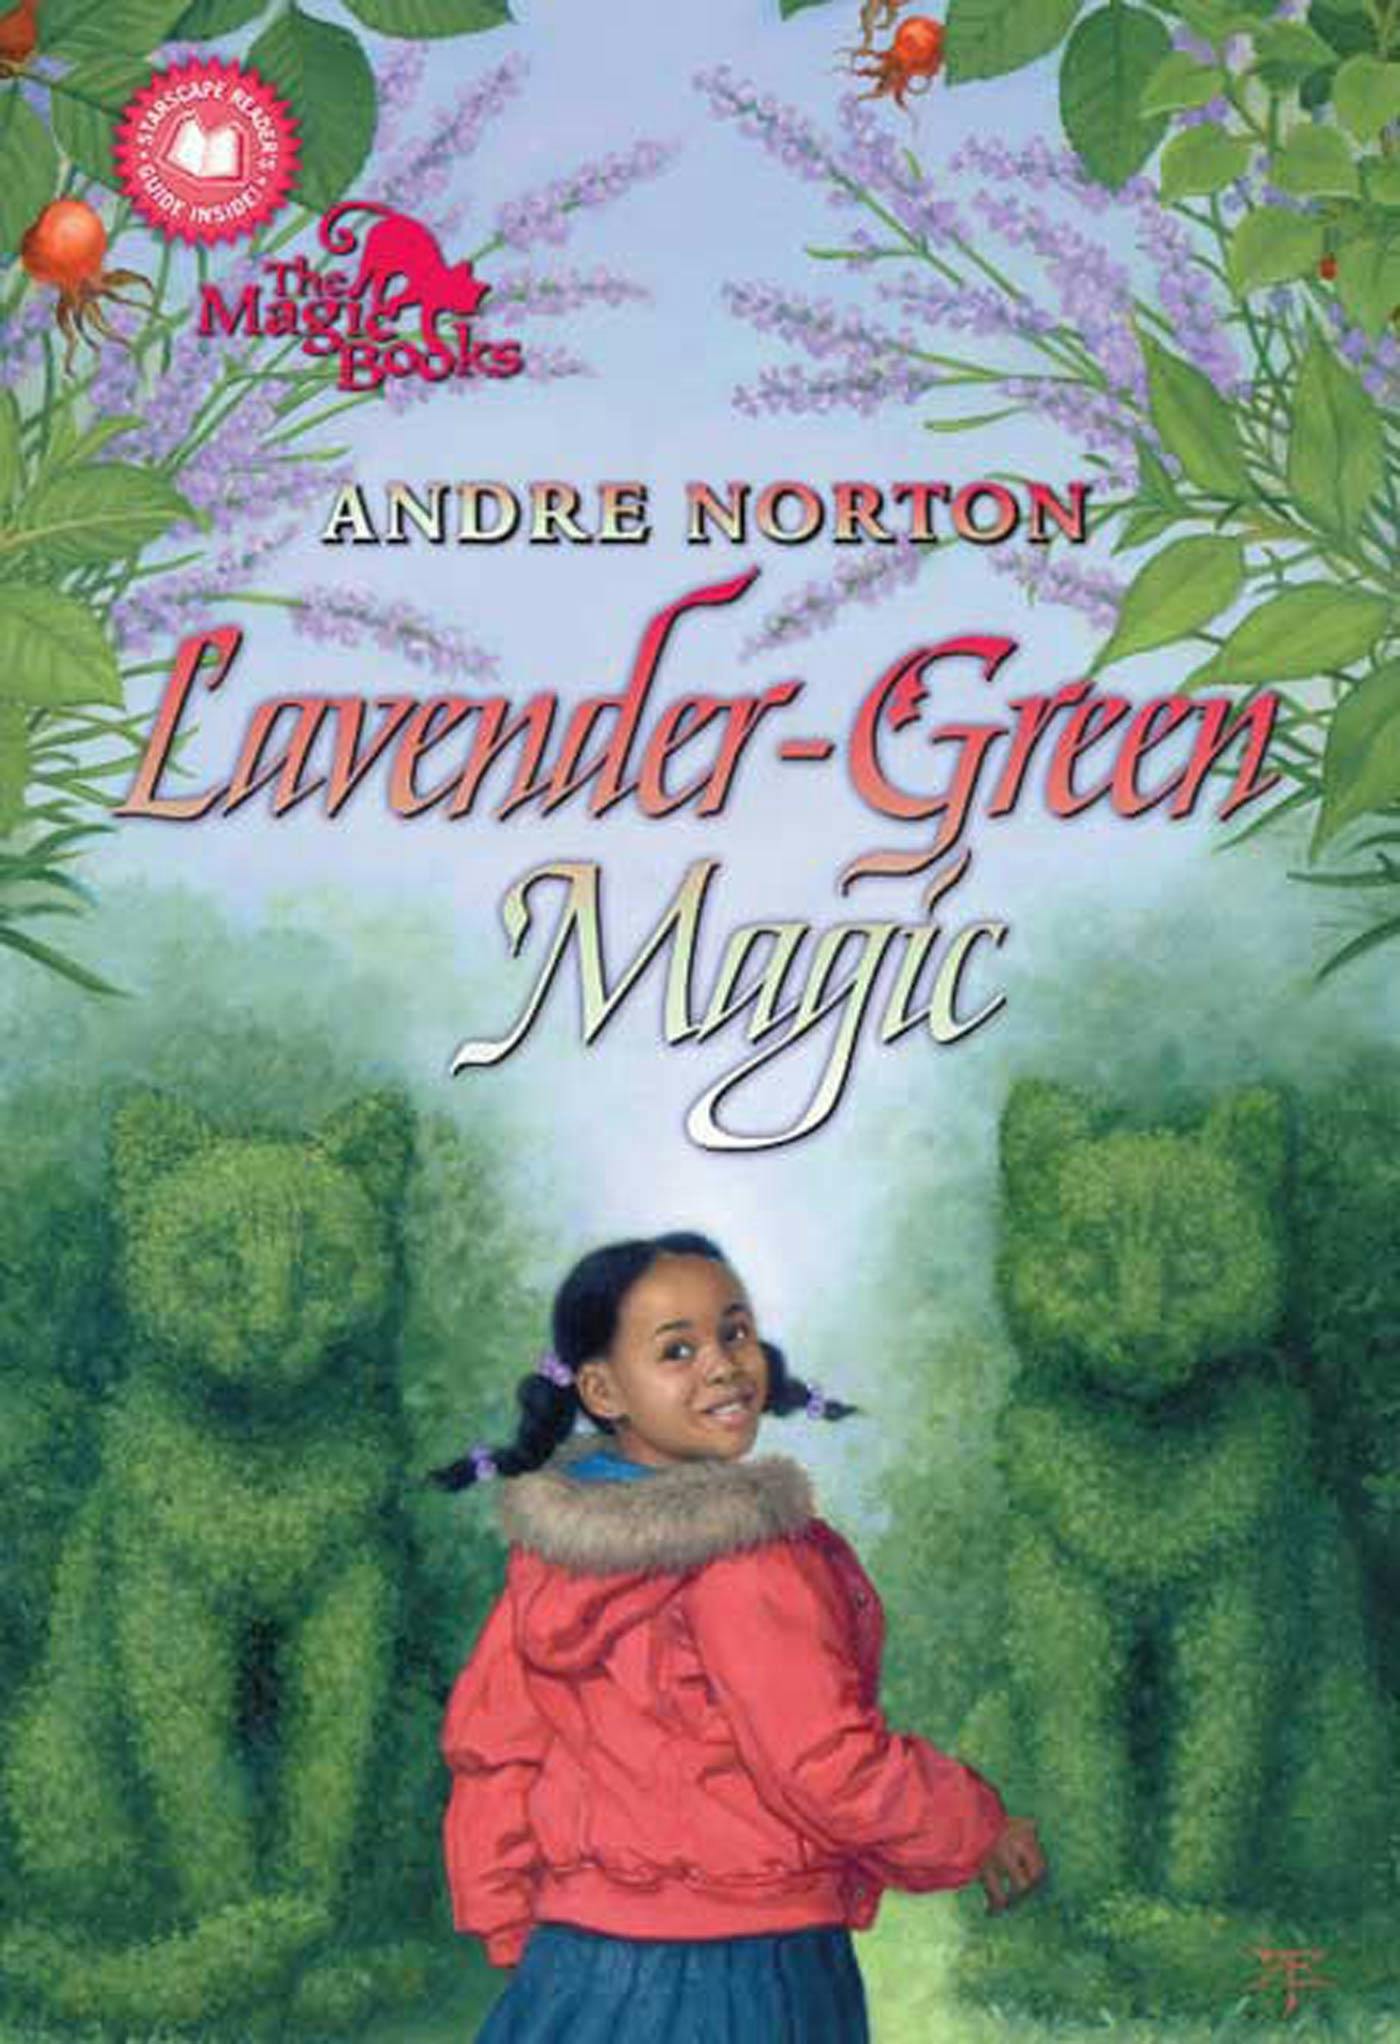 Cover for the book titled as: Lavender-Green Magic